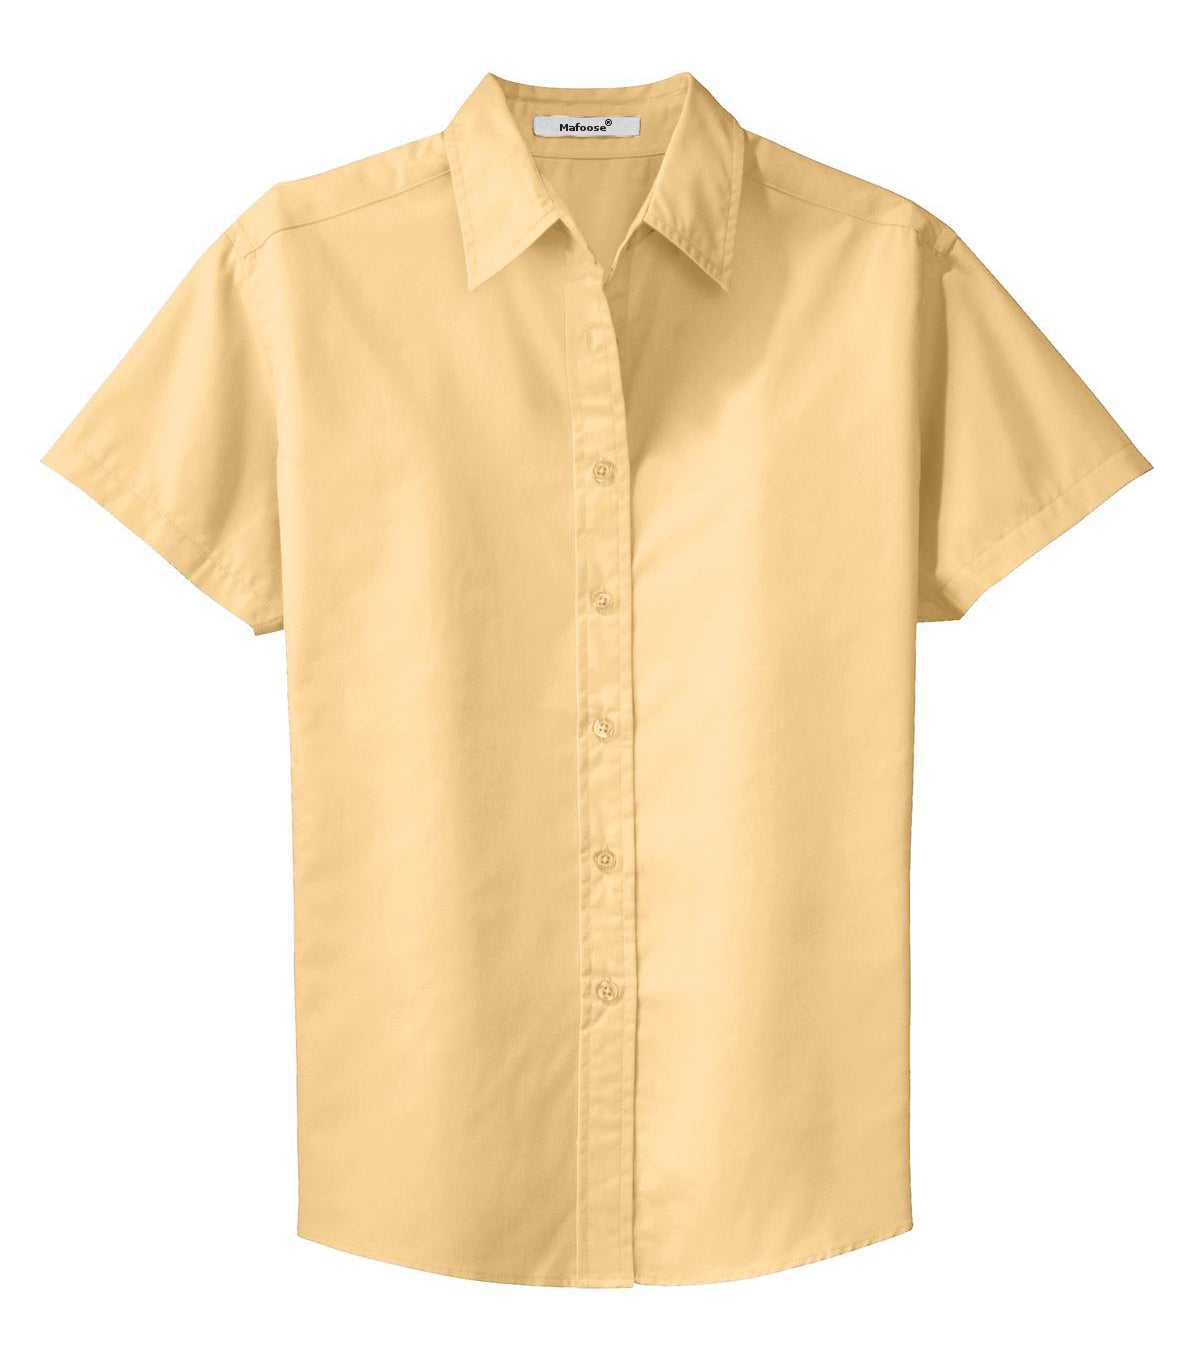 Mafoose Women's Comfortable Short Sleeve Easy Care Shirt Yellow-Front